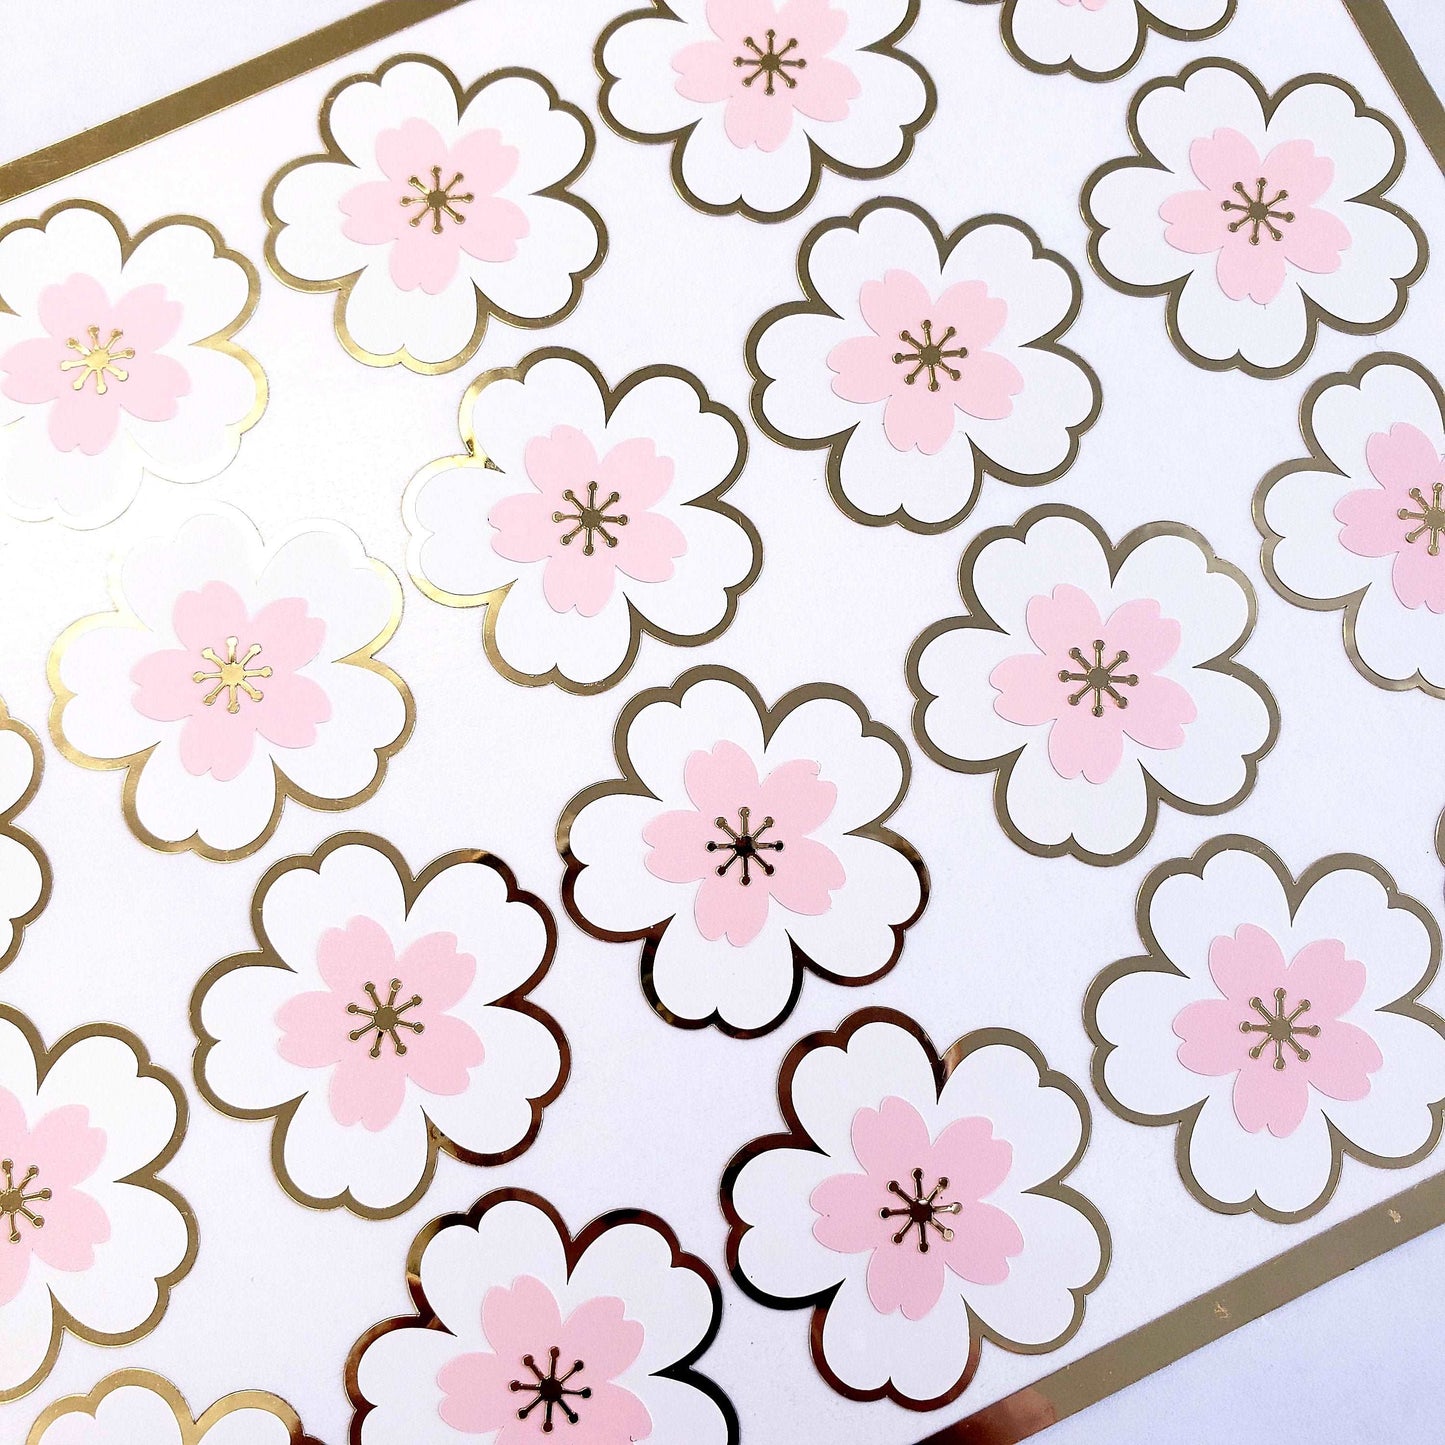 Set of 20 White Pink and Gold Cherry Blossom Stickers, Sakura Flower Decals, Spring Crafts, Wedding Envelope Seals, Mother's Day Gift.